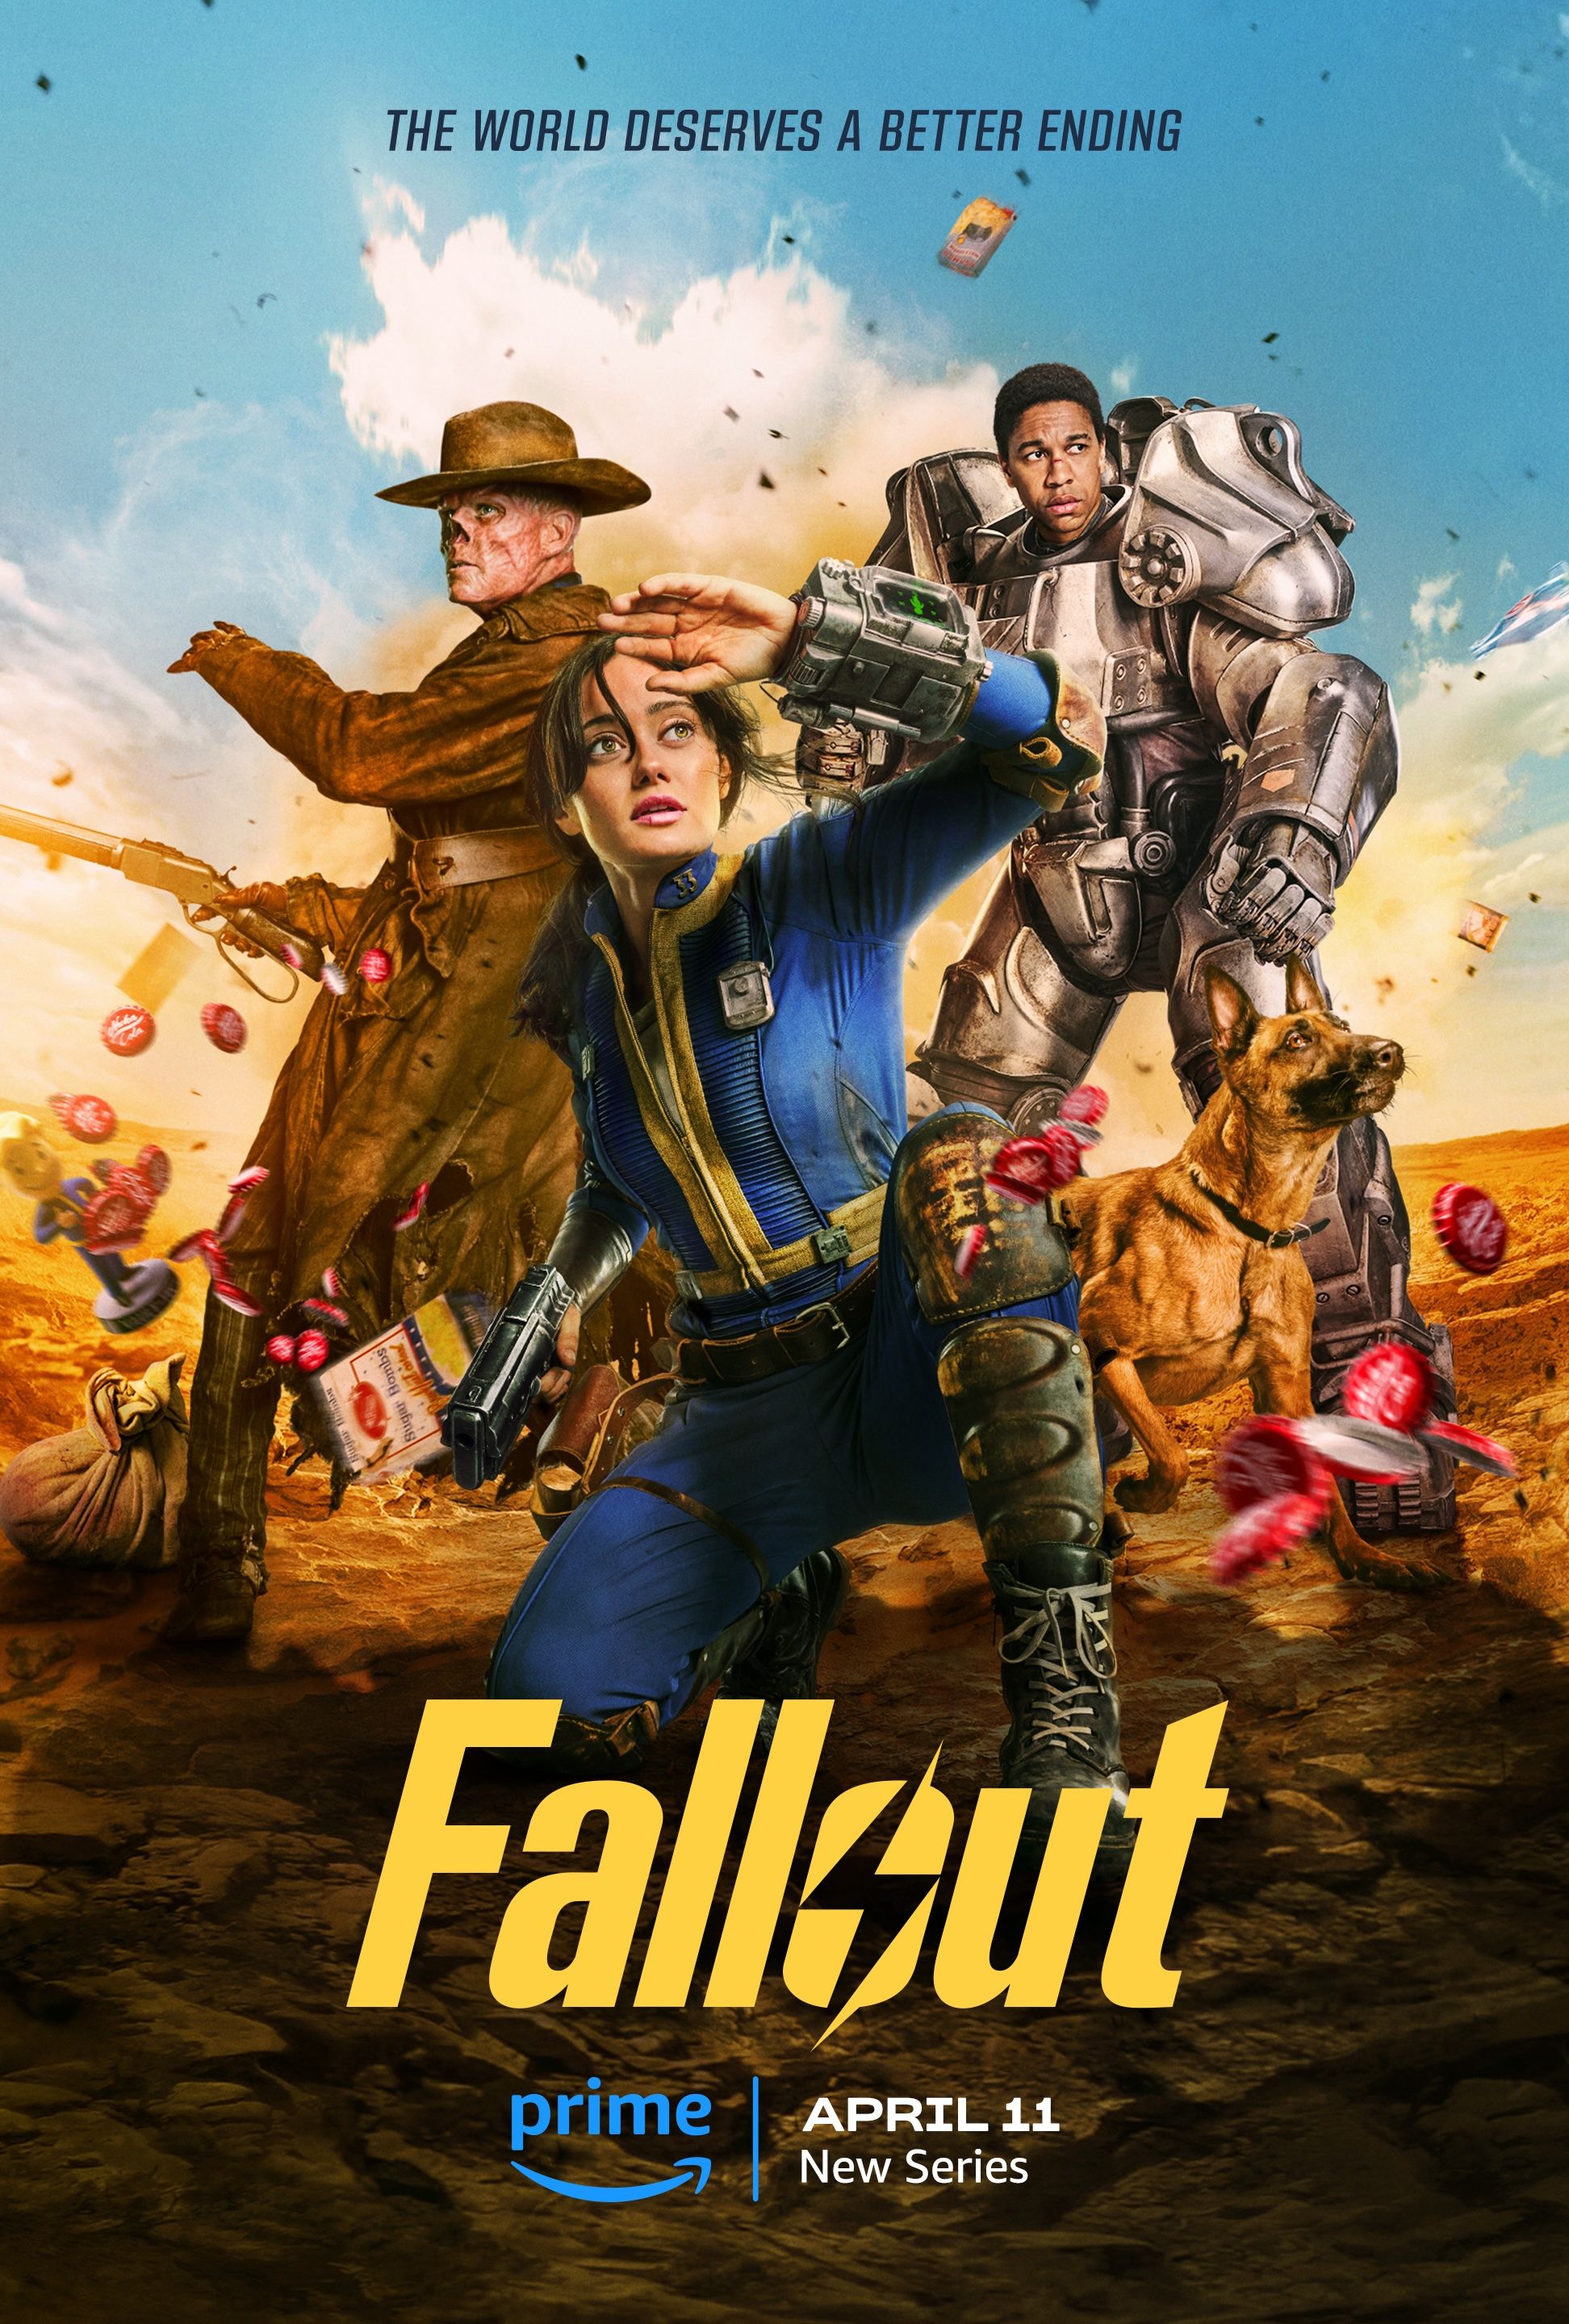 Fallout TV show poster featuring Lucy, CX404, Ghoul, and Maximus in front of an explosion with flying bottle caps